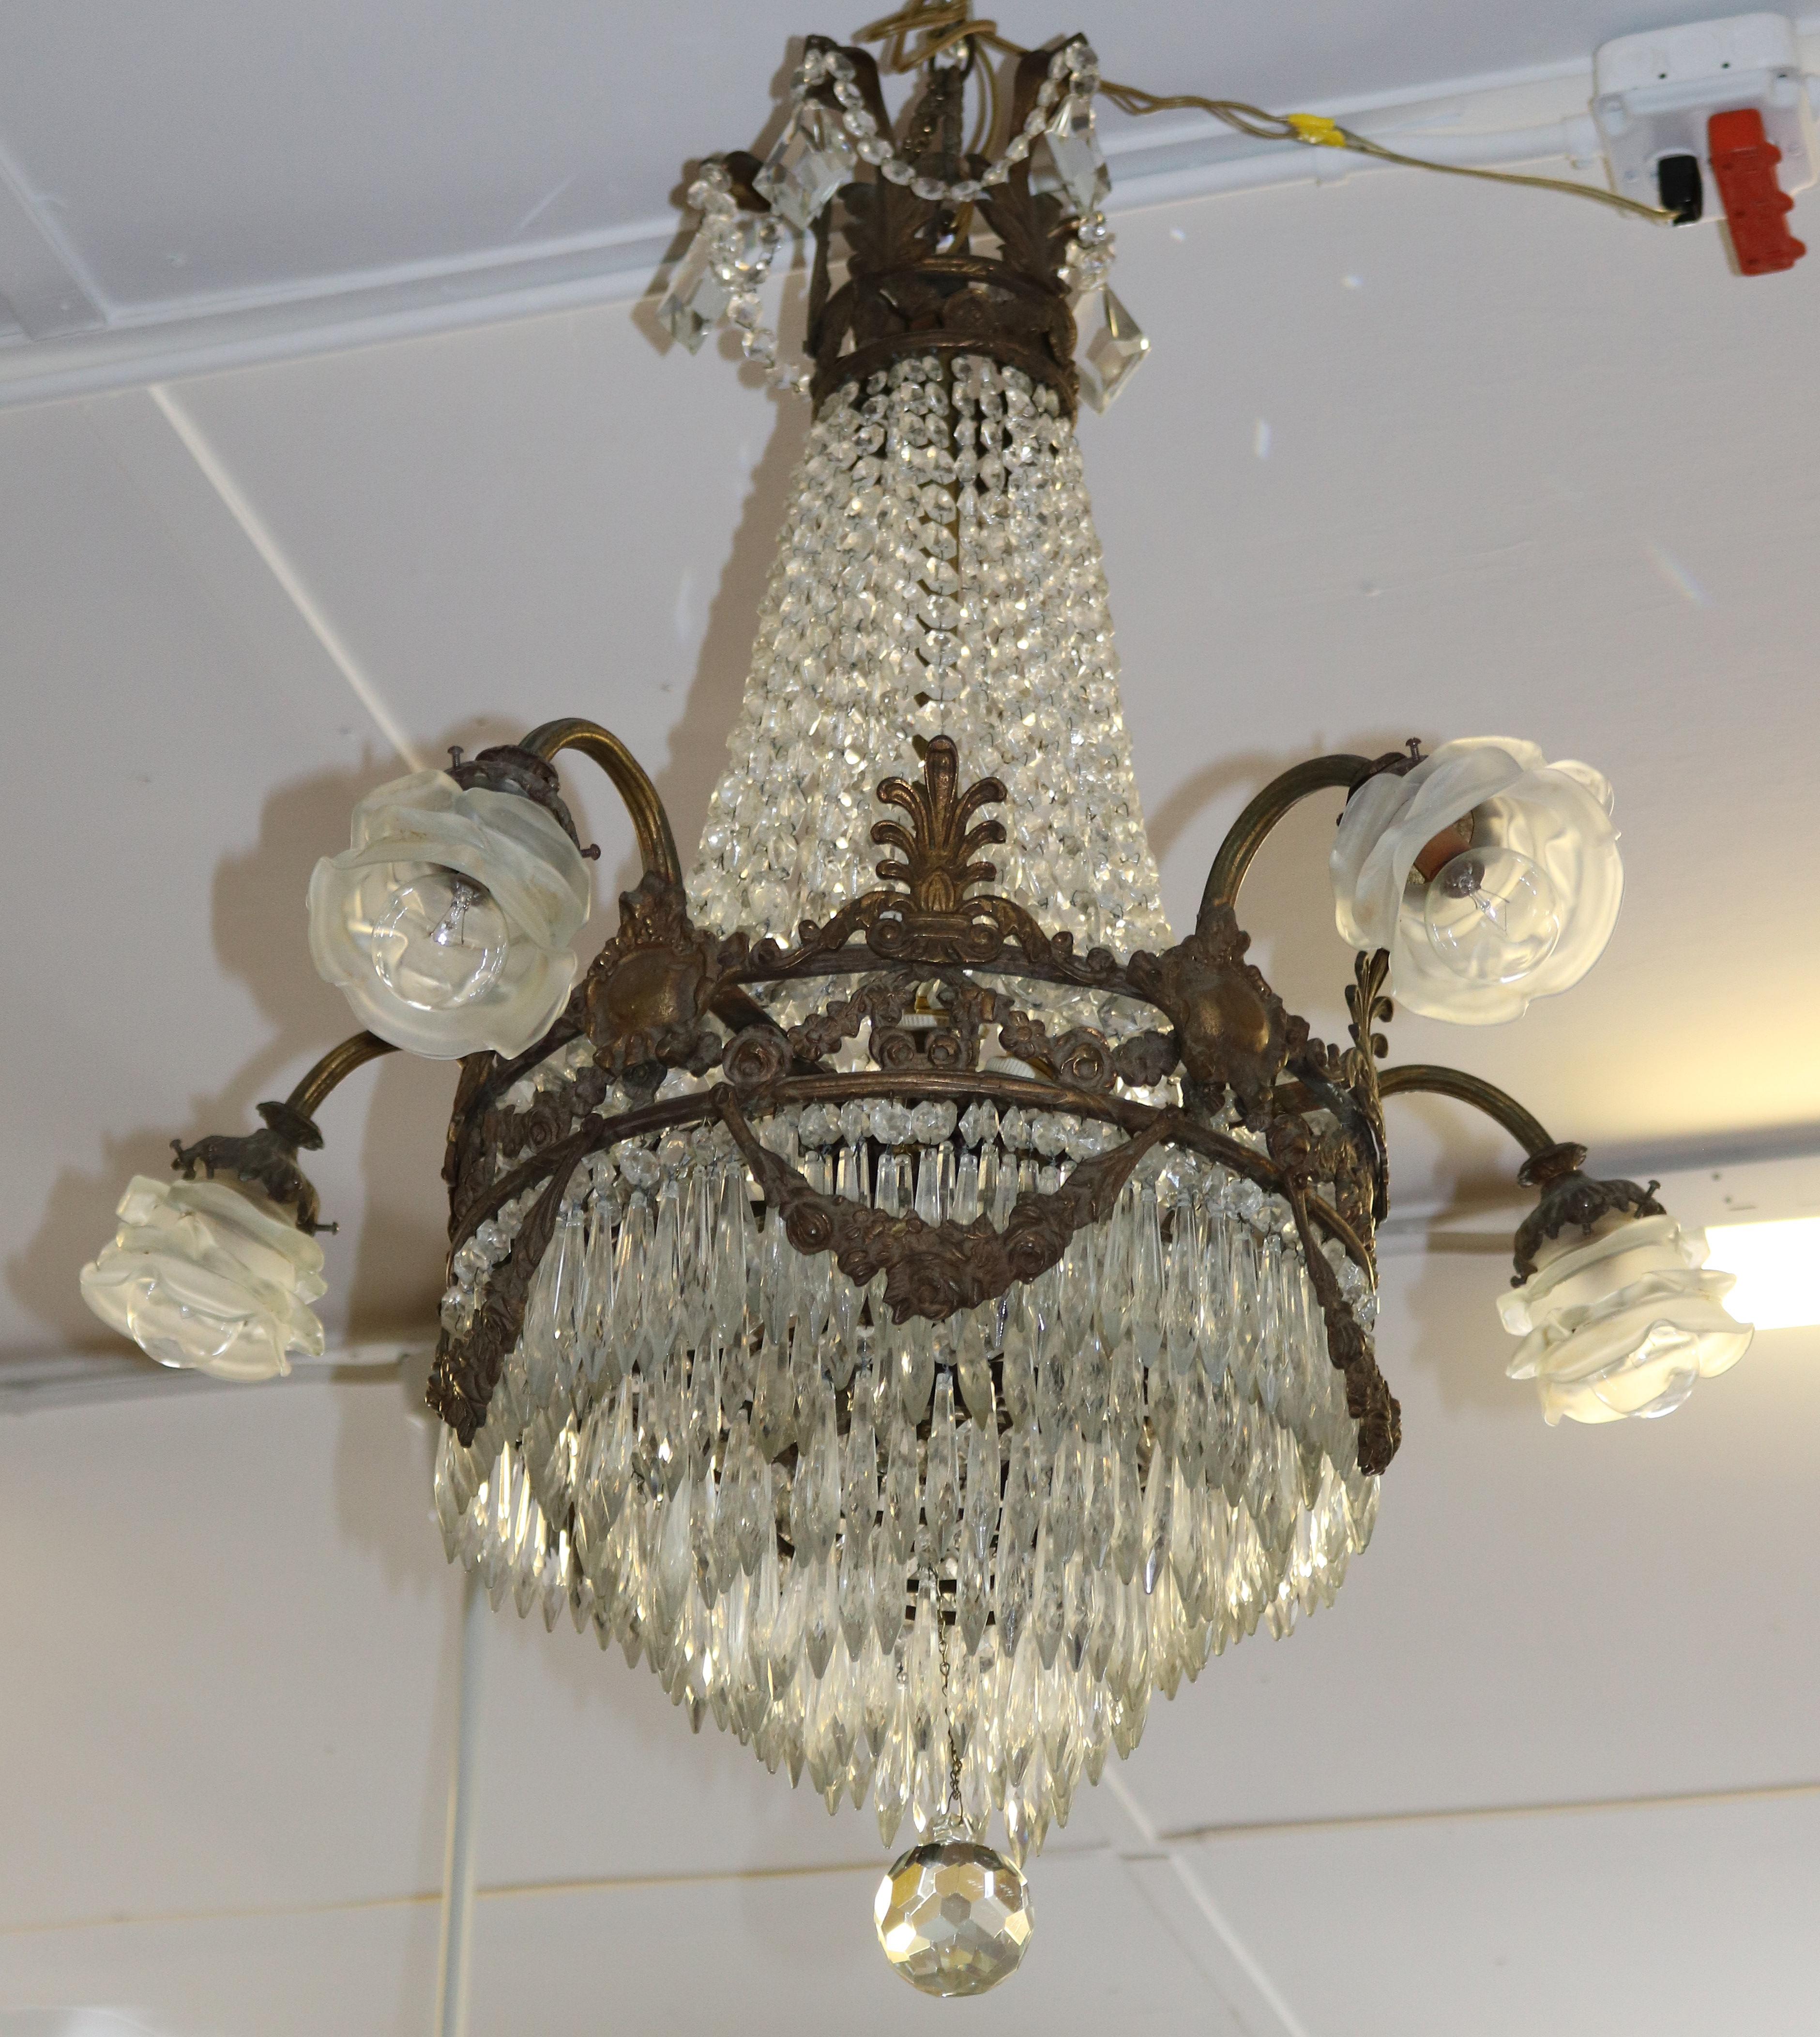 ​Antique French Bronze & Crystal Louis XVI Style Beaded Basket Chandelier

Dimensions : 34